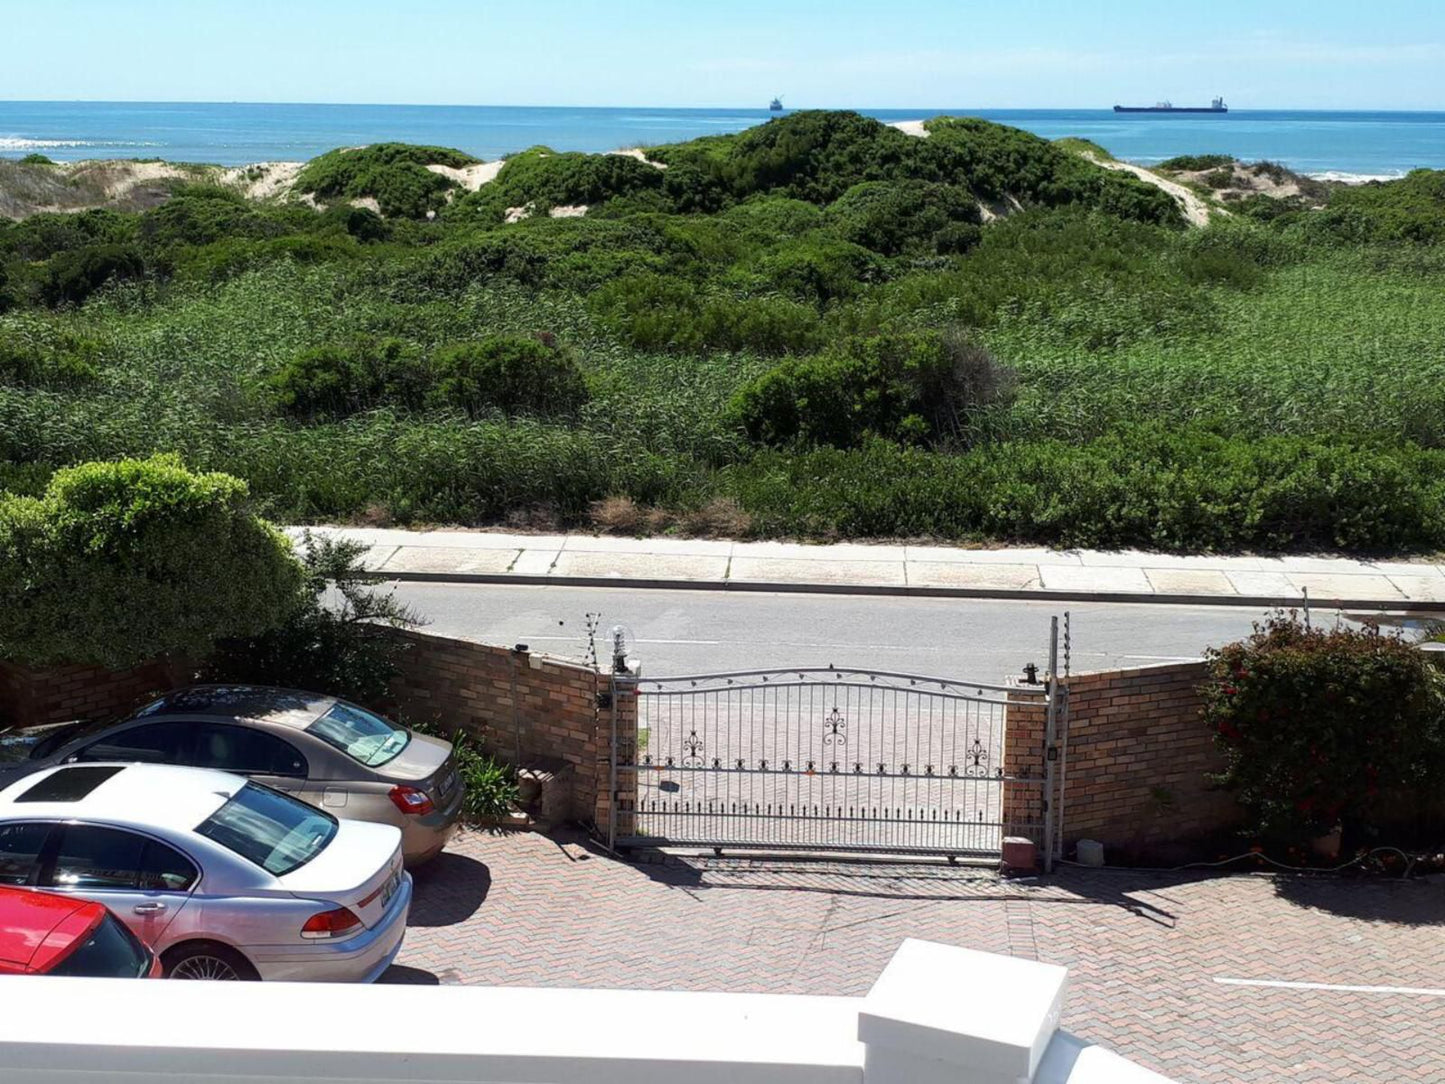 Bluewater Beachfront Guest House Bluewater Bay Port Elizabeth Eastern Cape South Africa Beach, Nature, Sand, Car, Vehicle